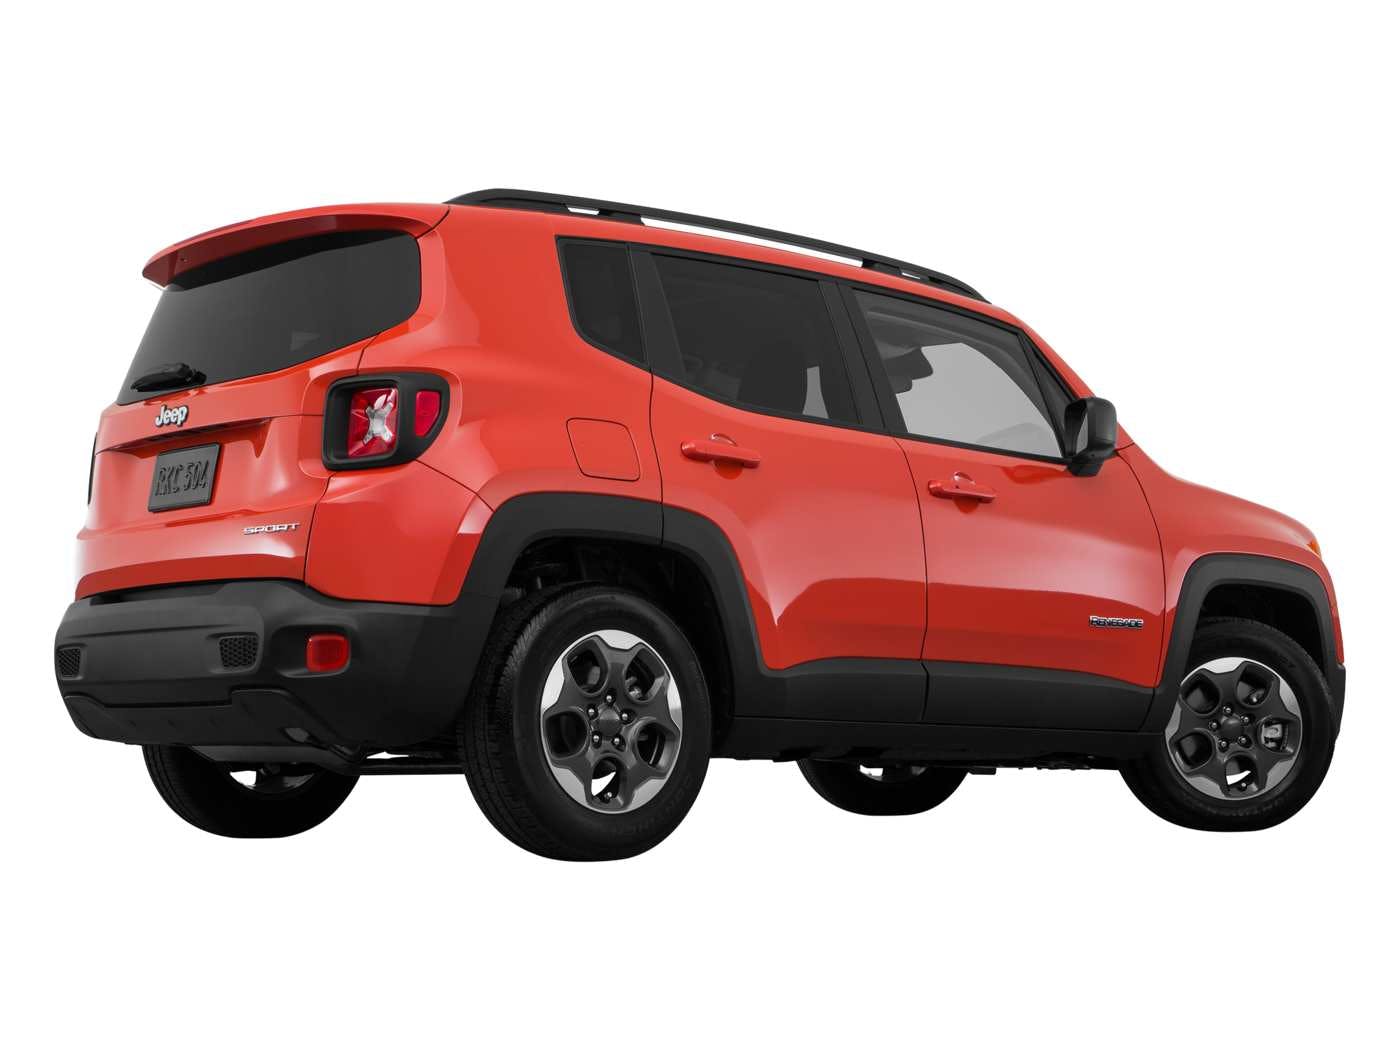 Jeep Renegade (2018) SUV review: chunky charm